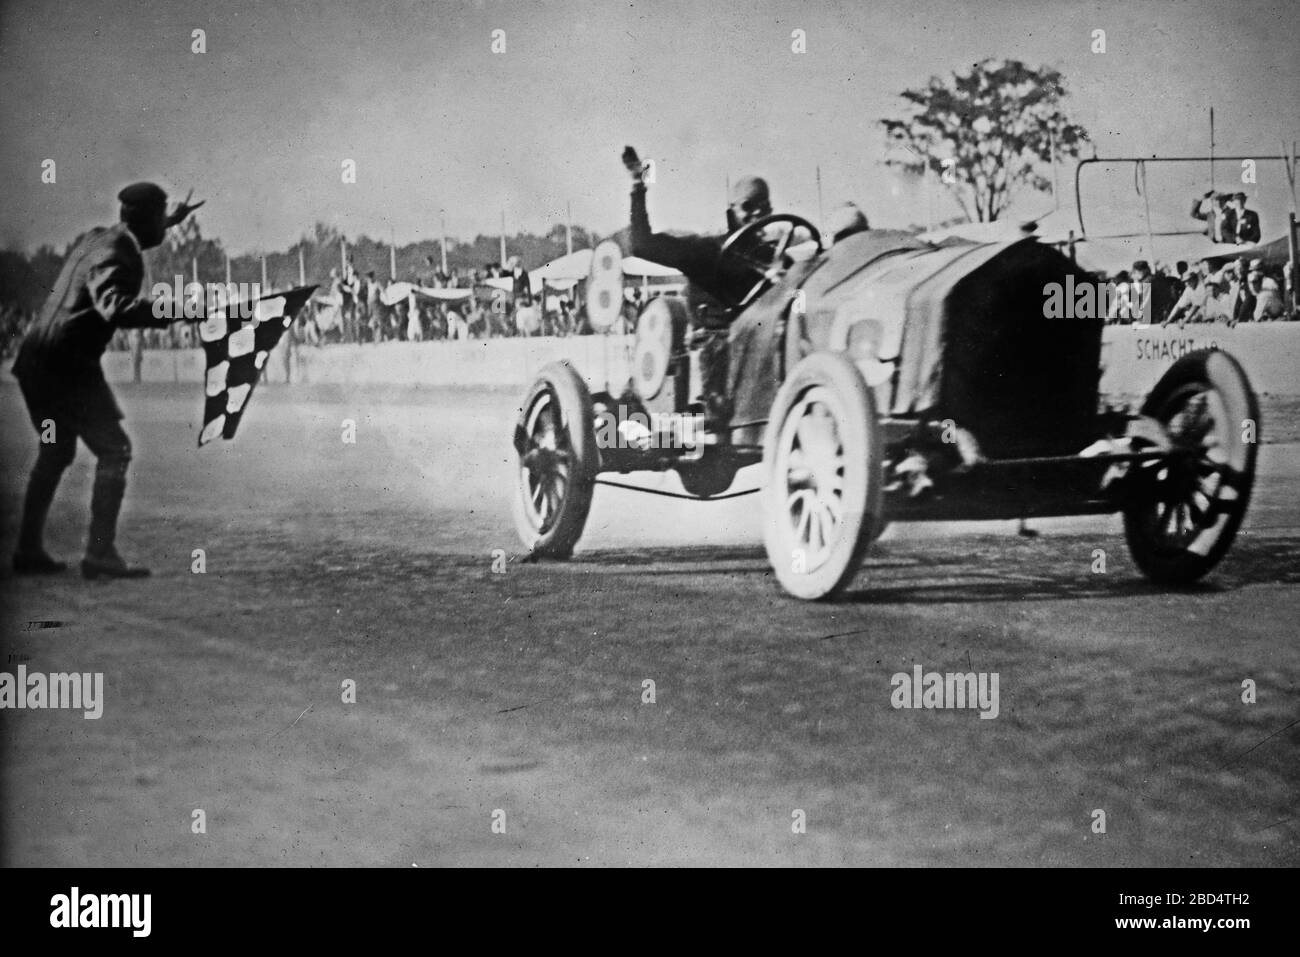 Joe Dawson crossing the finish line as the winner of the Indianapolis 500 automobile race ca. 1912 Stock Photo